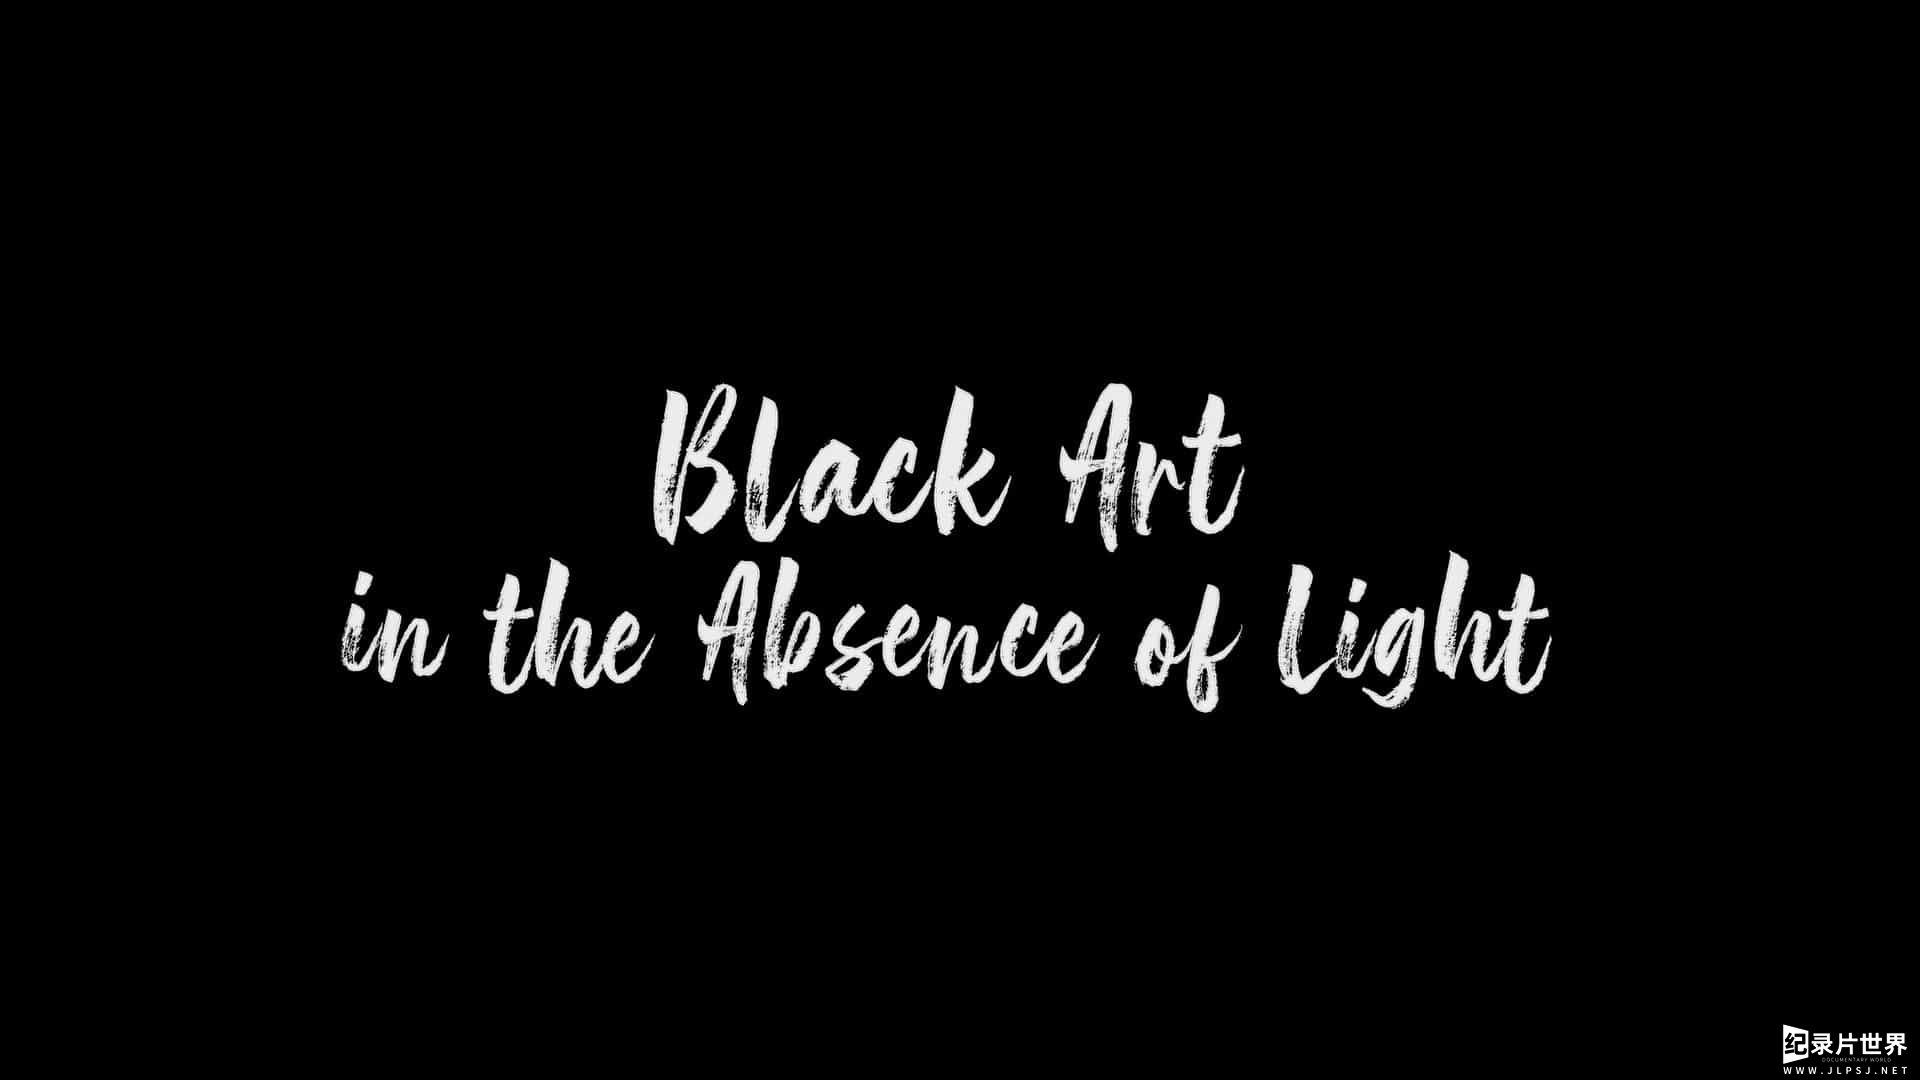 HBO纪录片《黑人艺术：失光 Black Art: In the Absence of Light 2021》全1集